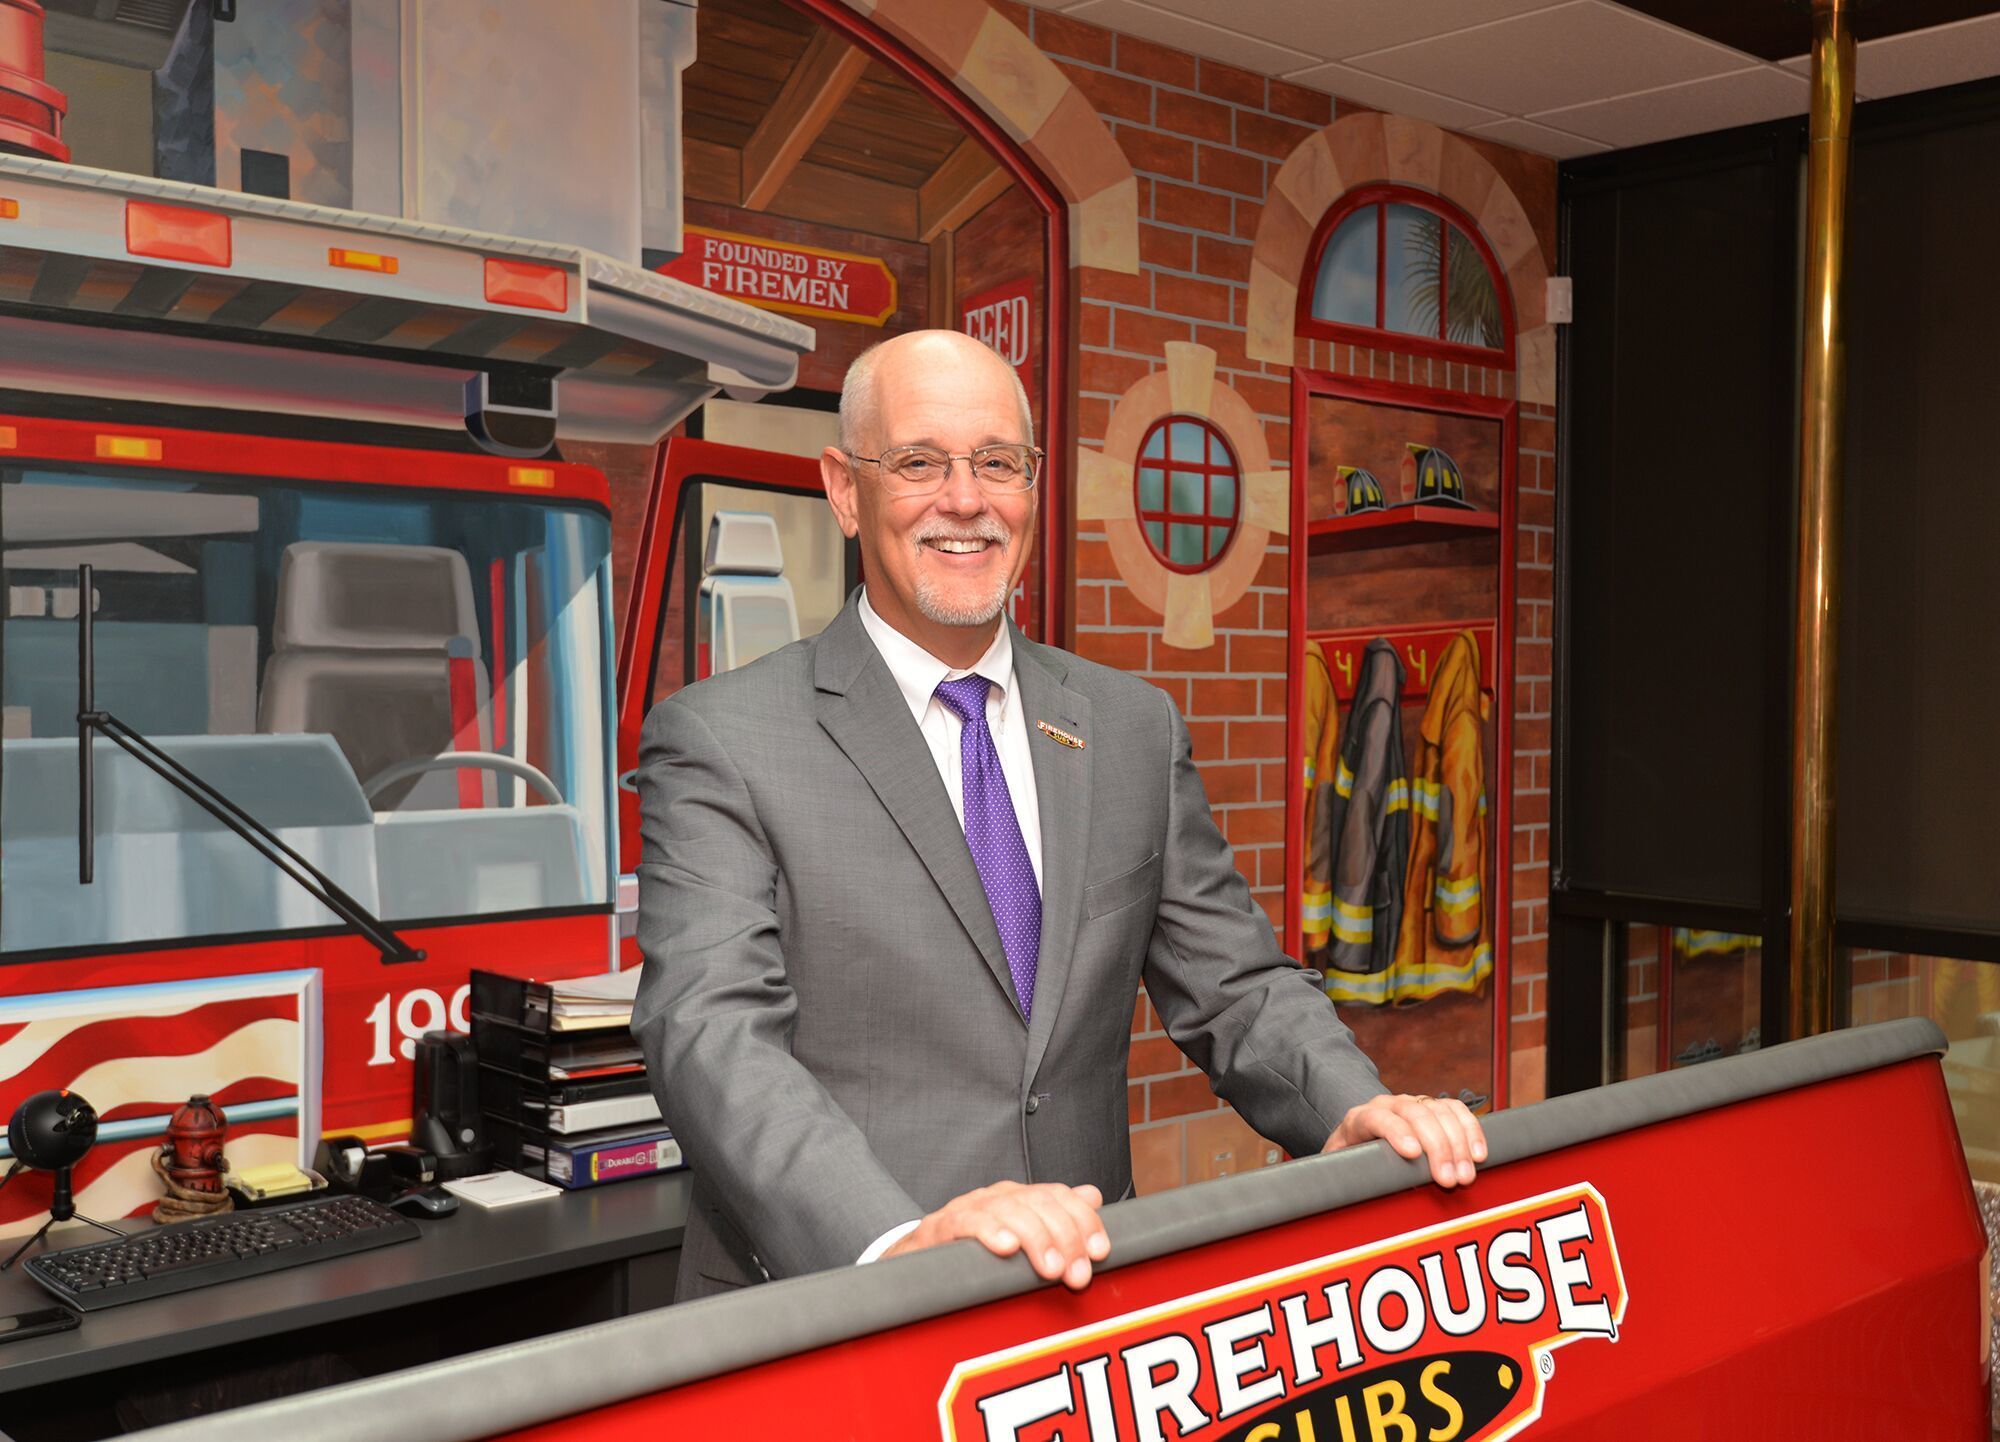 Firehouse Subs CEO Don Fox says under the new ownership he is “really looking forward to leading this team to new heights.”